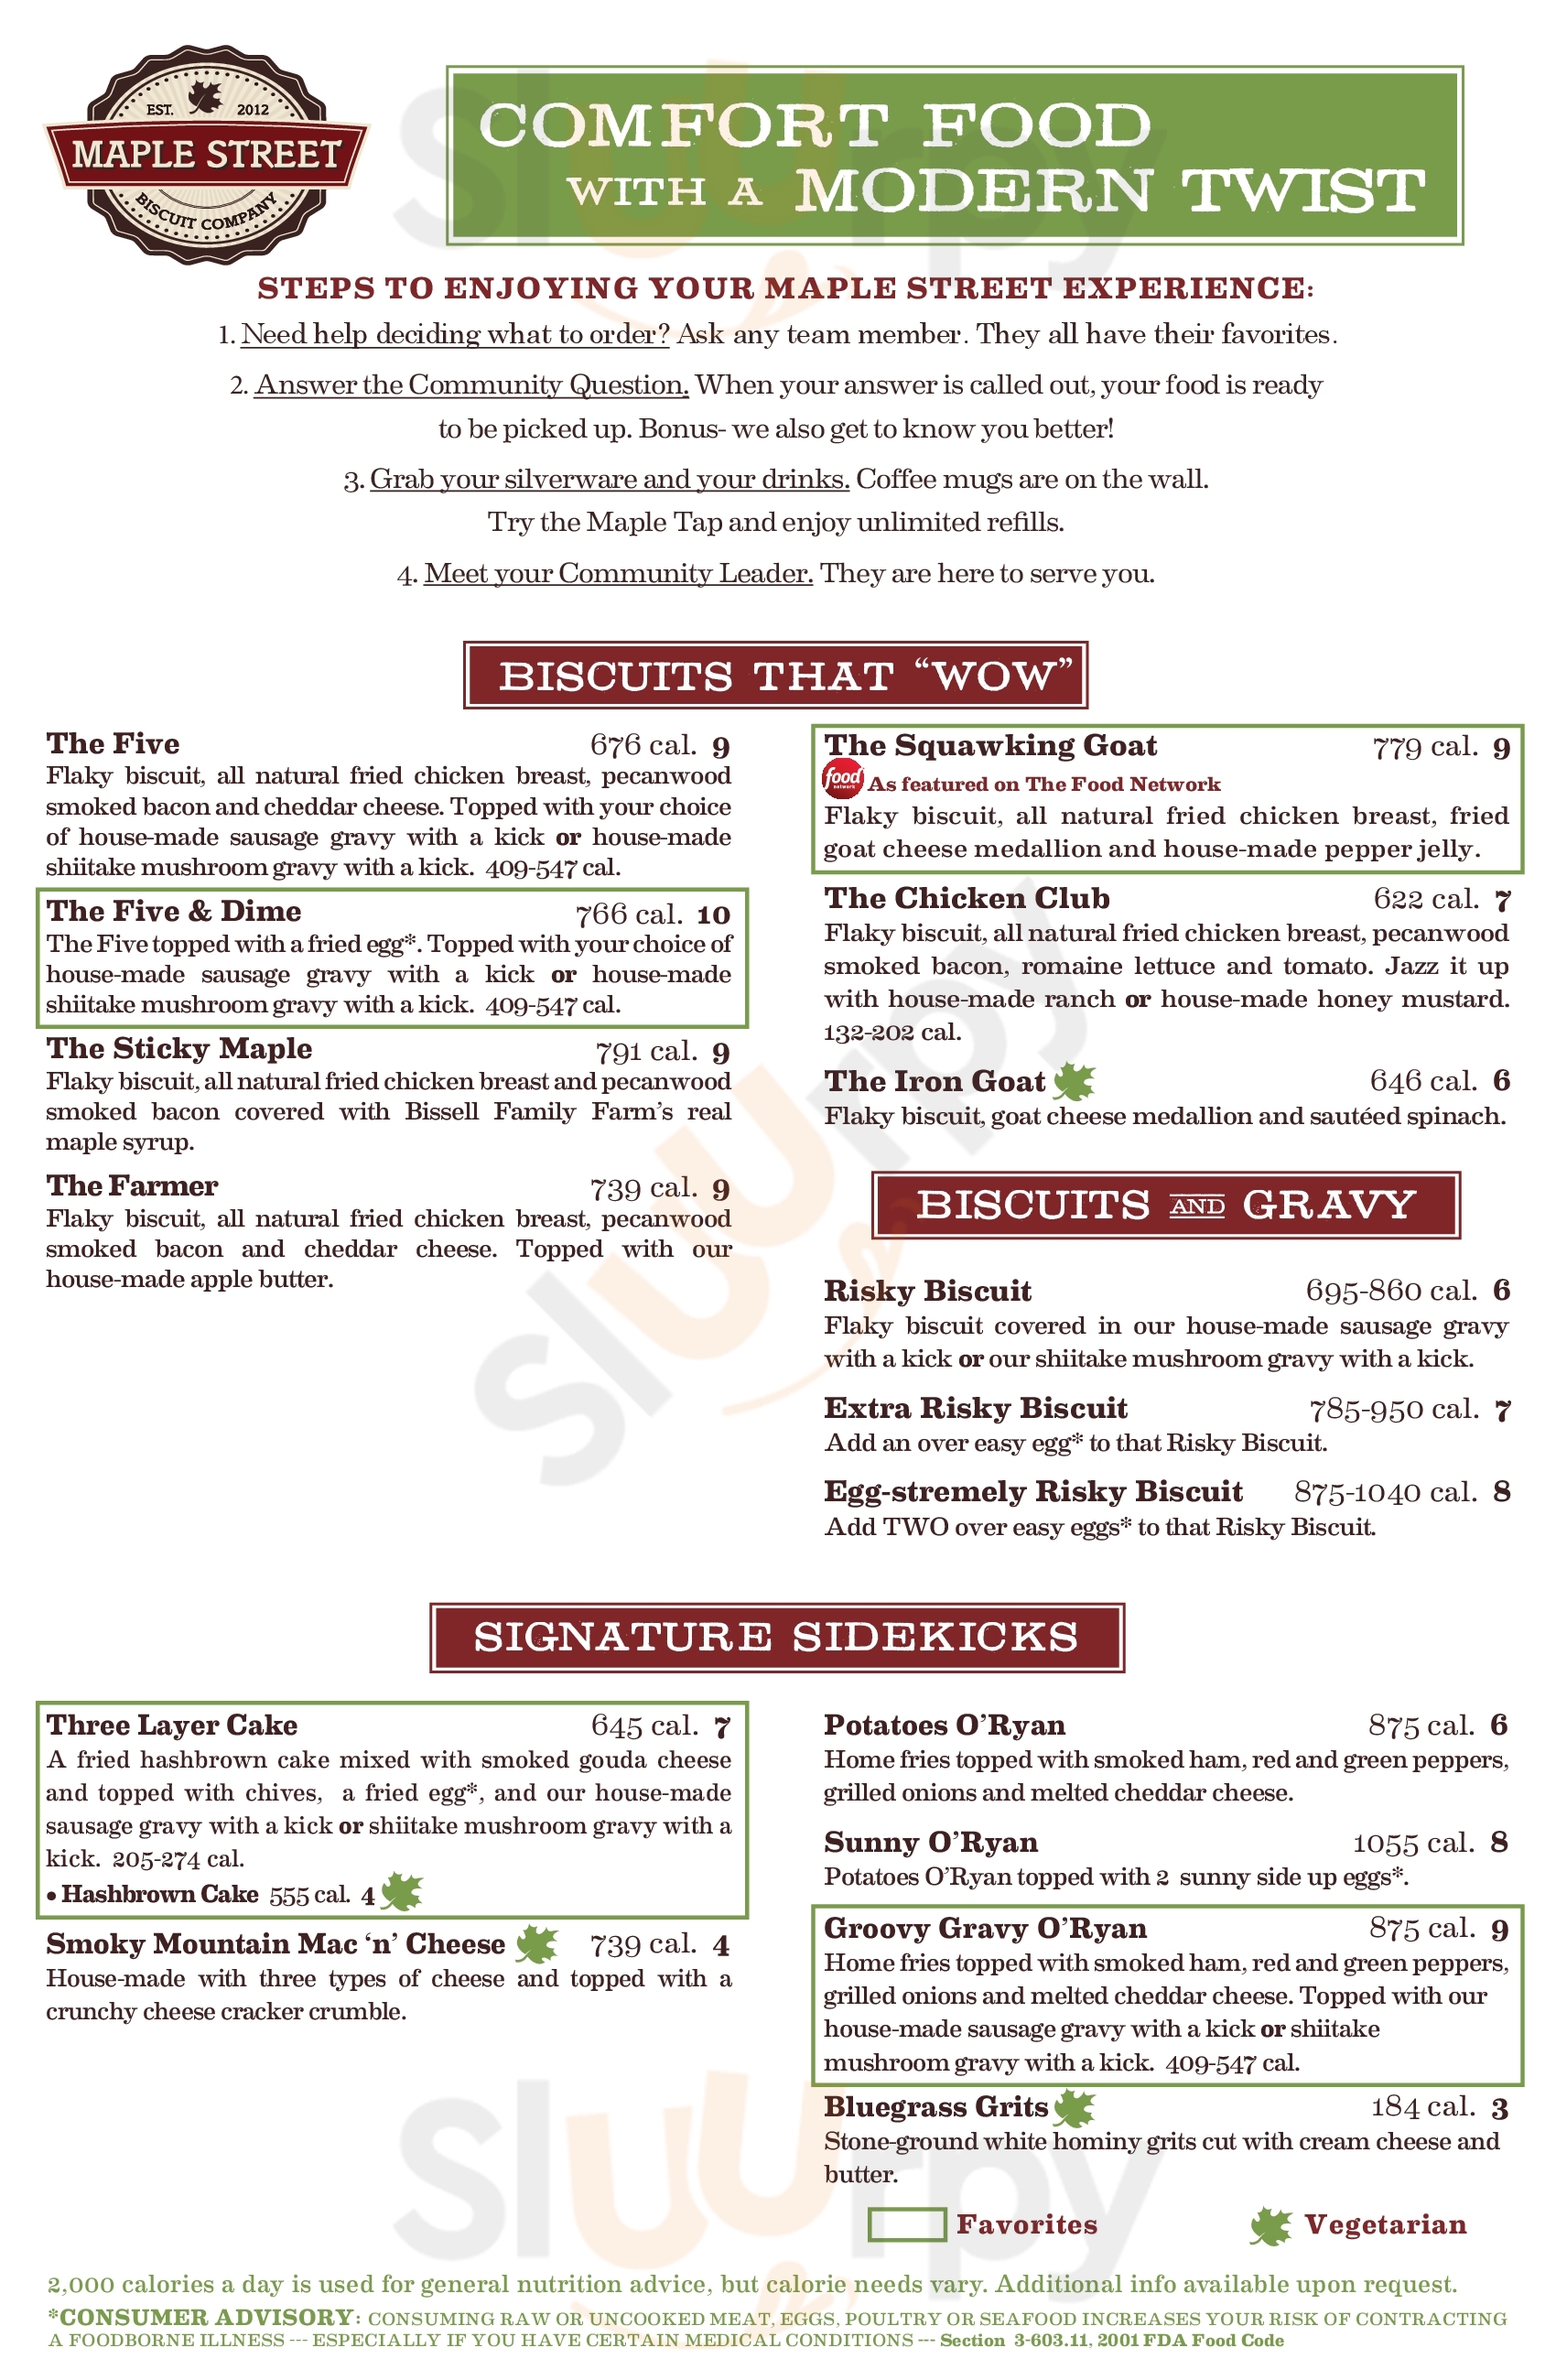 Maple Street Biscuit Company (carrollwood) Tampa Menu - 1